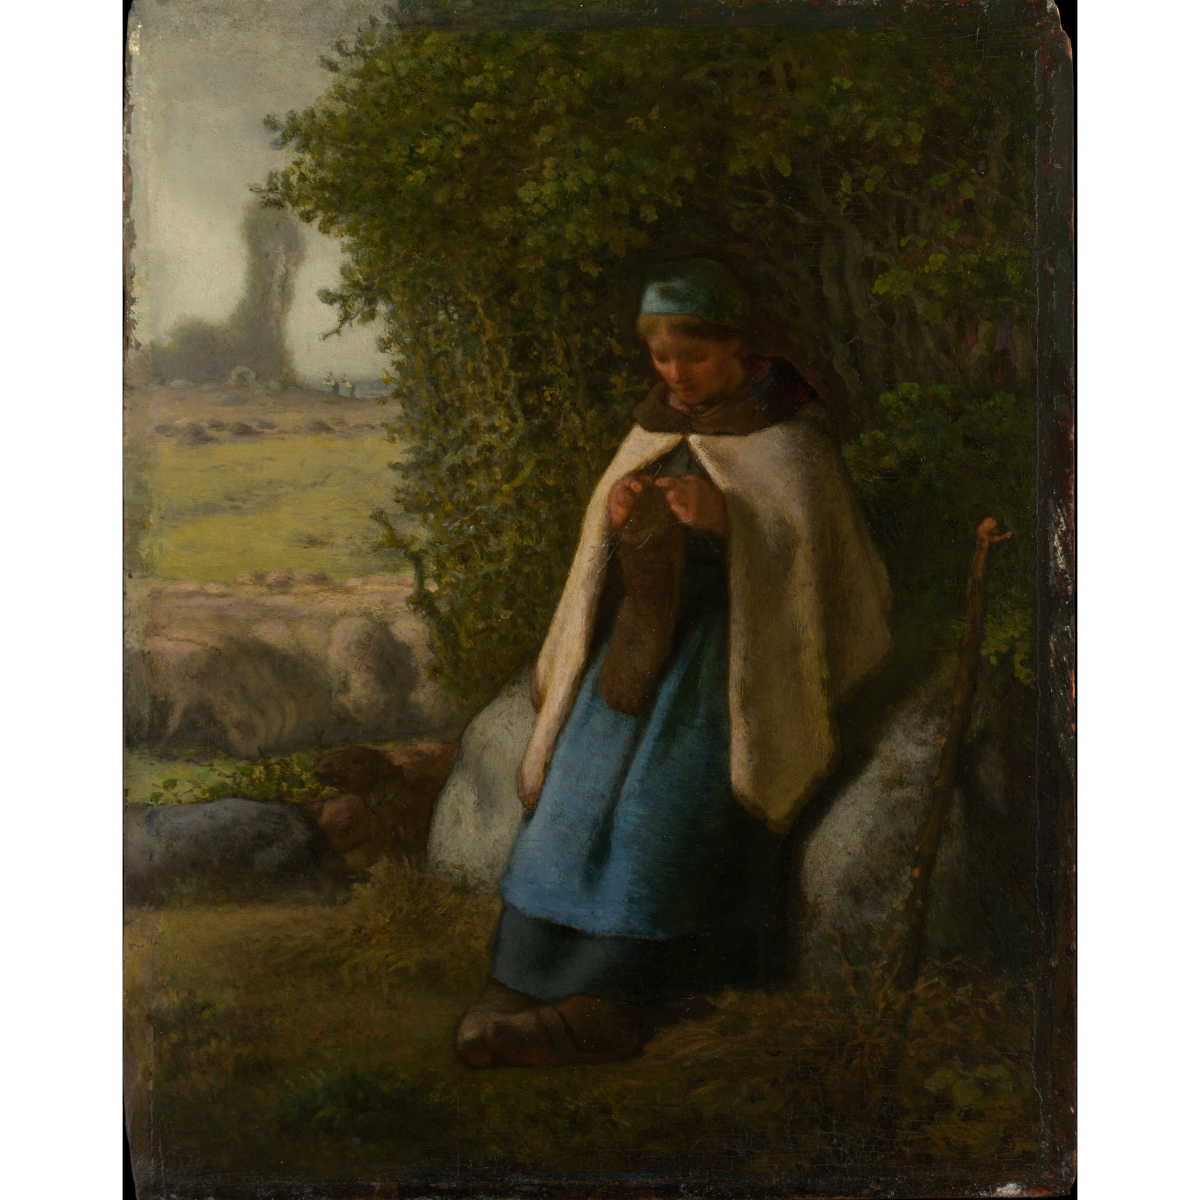 Shepherdess Seated on a Rock by Jean-François Millet (painting).